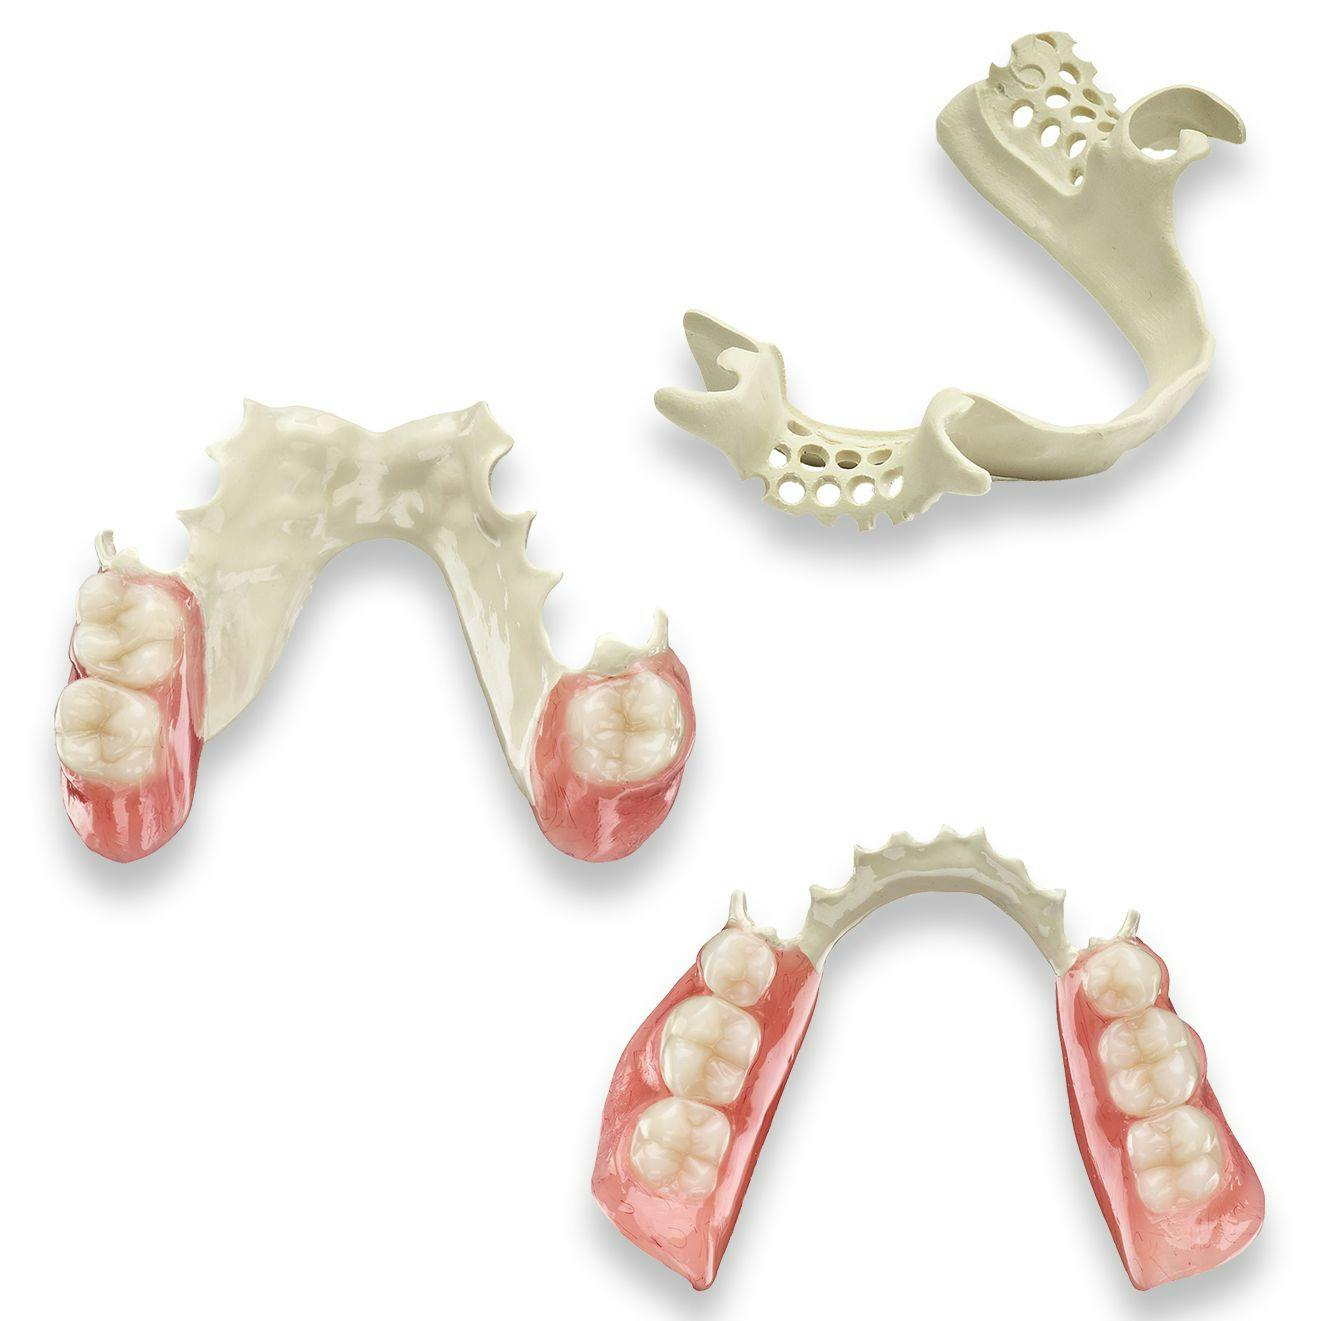 Dentivera removable partials from Myerson